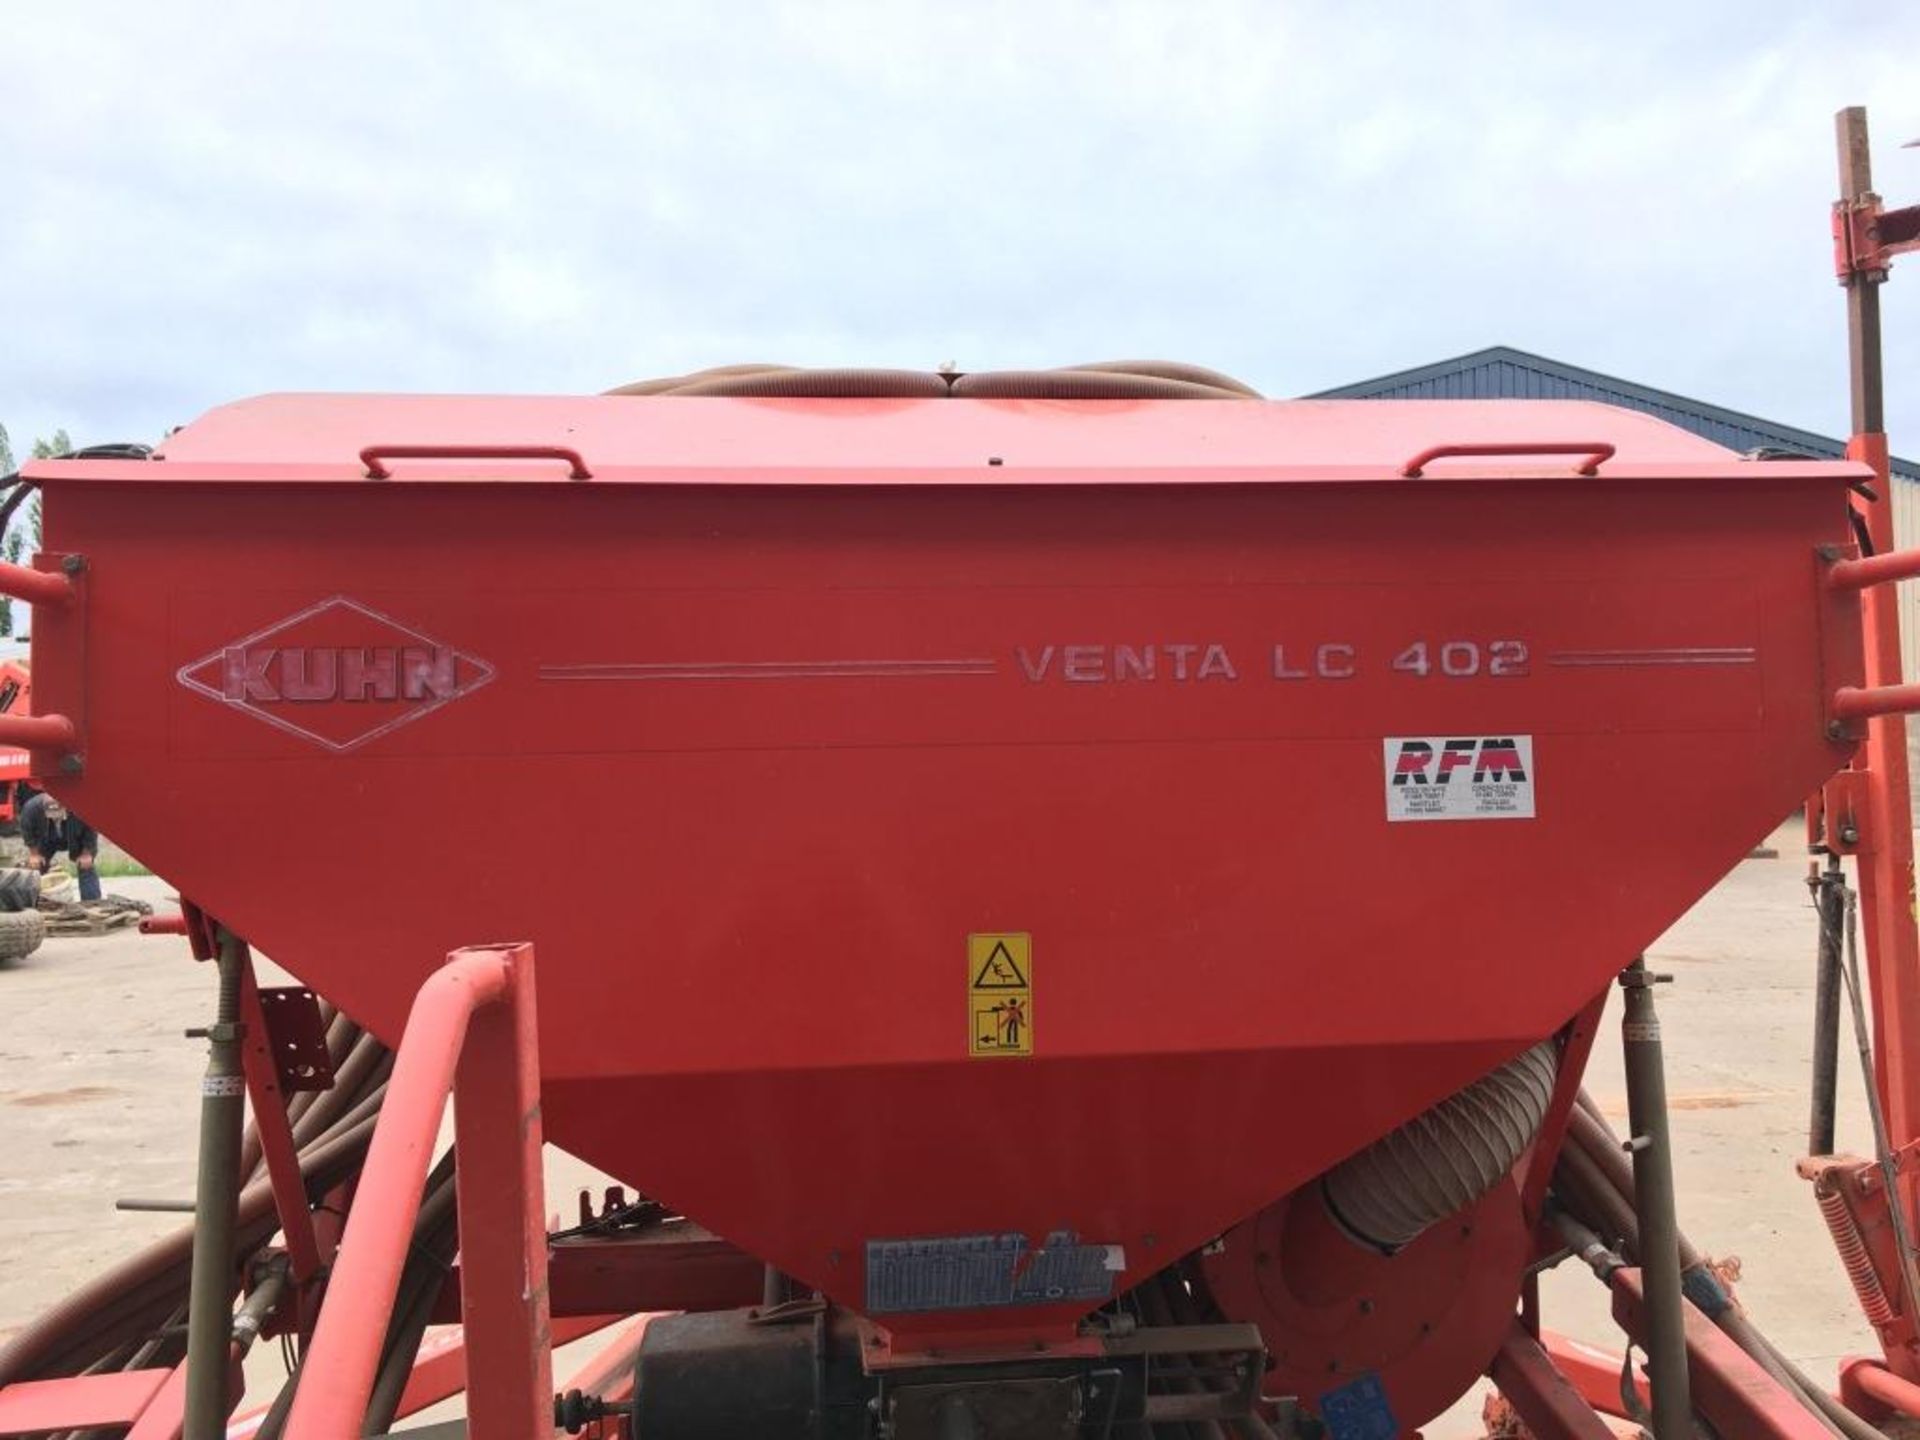 Kuhn HR 4003D 14' power harrow, serial number: A4631 (2002) with Kuhn Venta LC 402 seed drill, - Bild 13 aus 15